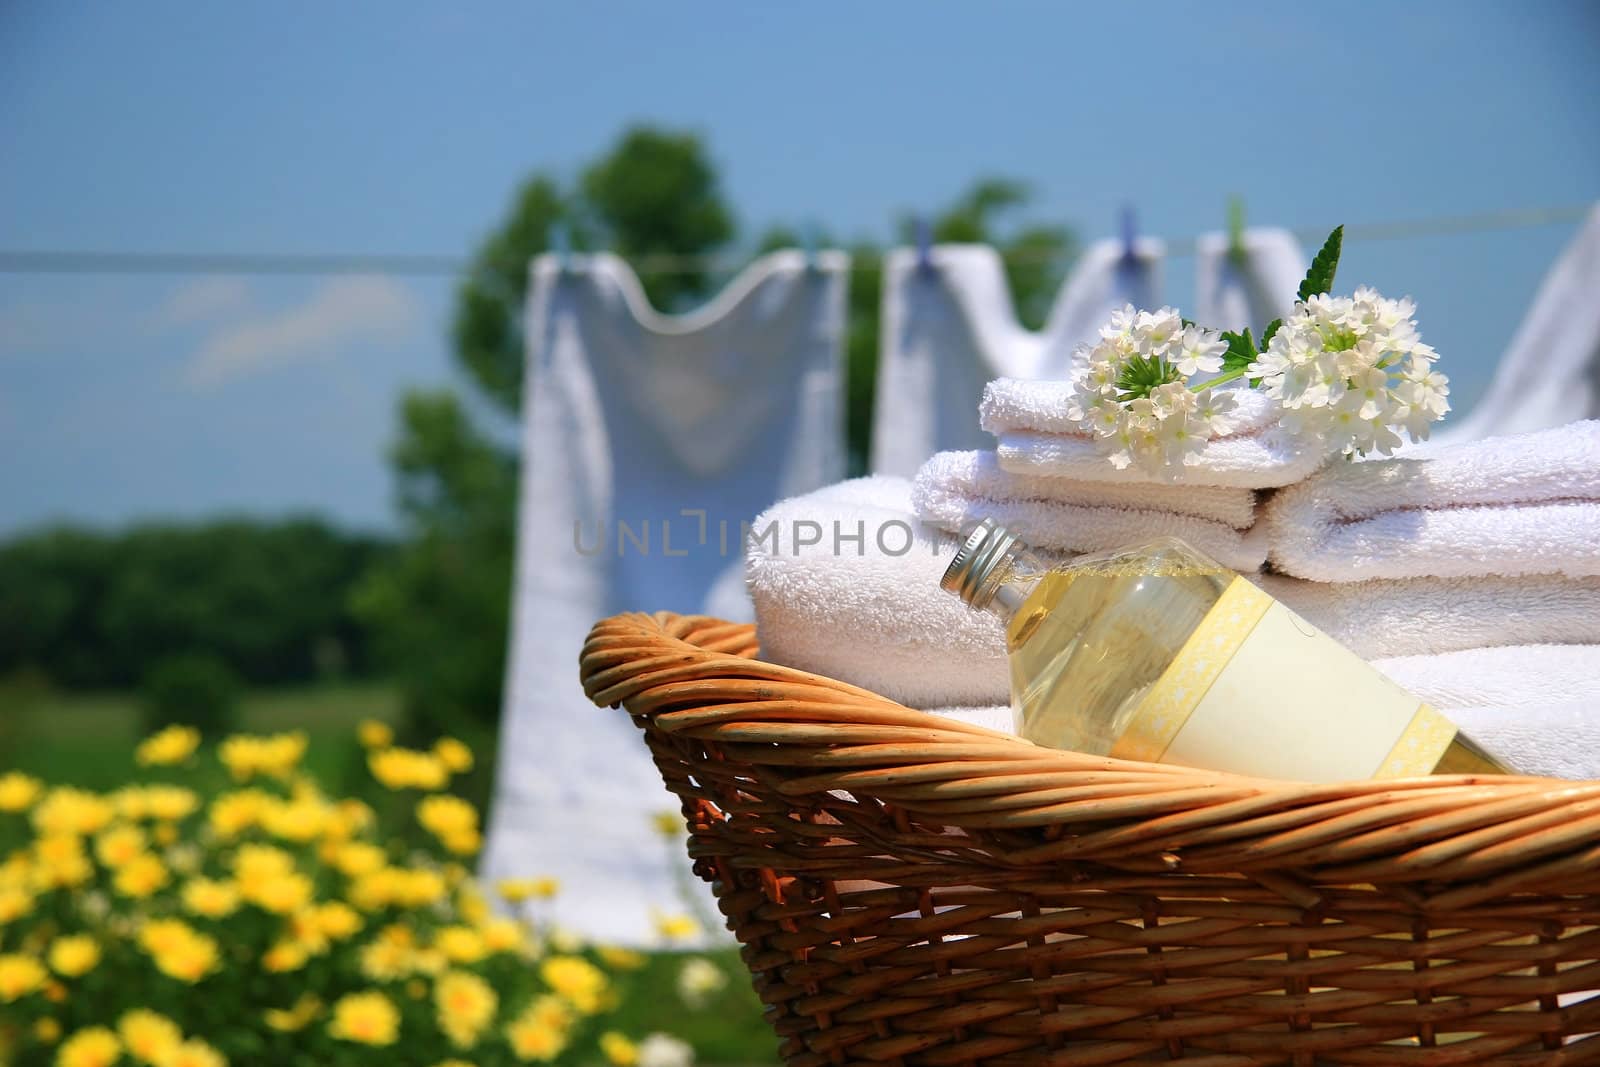 Wicker basket with laundry  by Sandralise